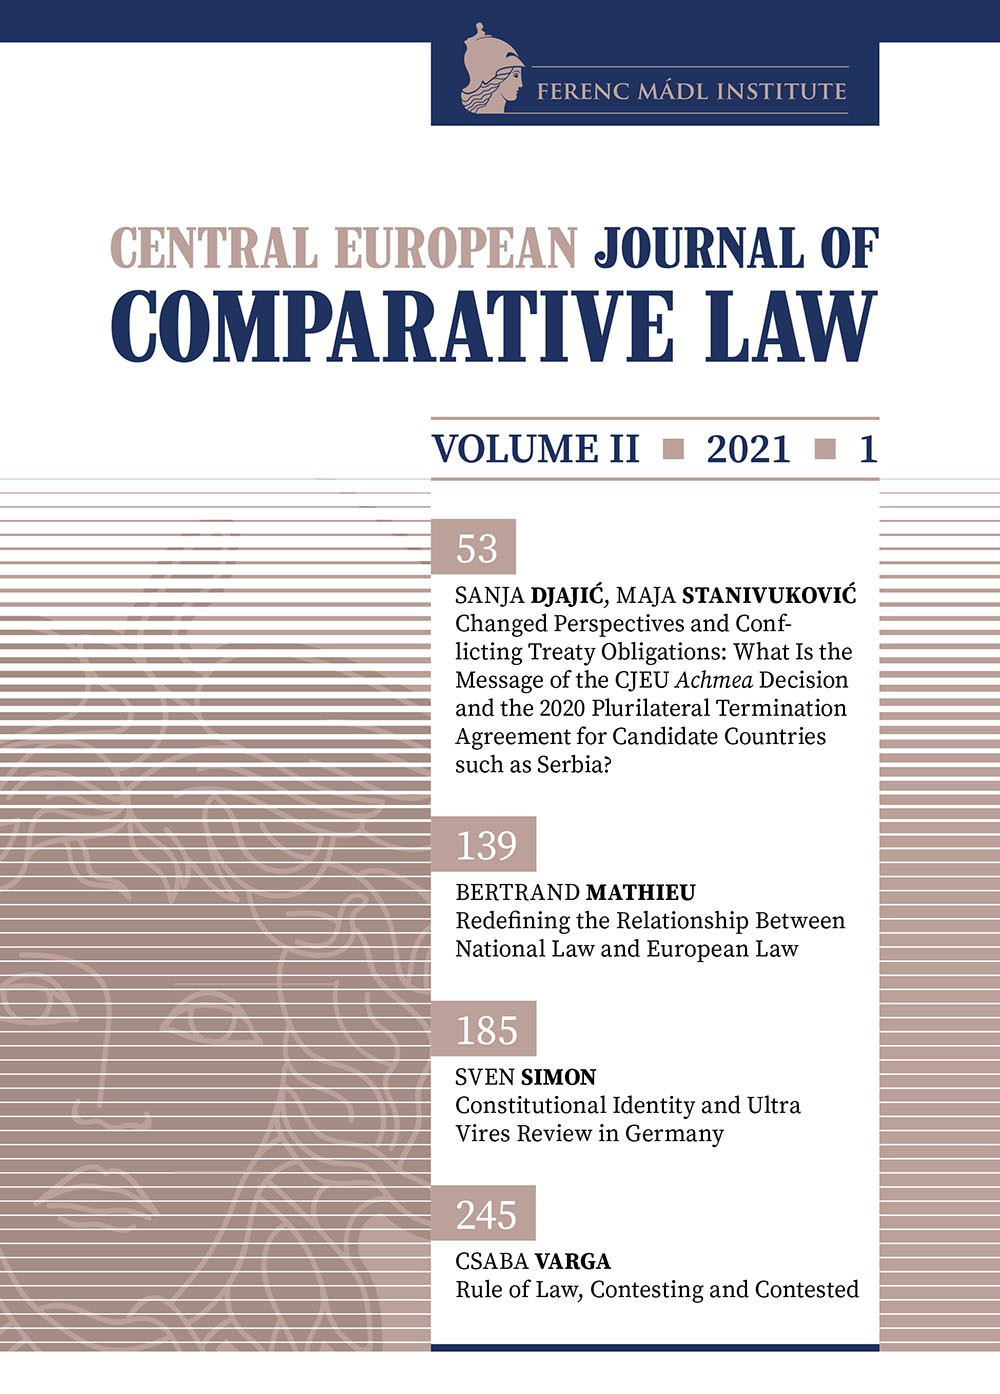 Constitutional Issues of the Judicial Career in Western Balkan States (Serbia, Montenegro, Bosnia and Herzegovina, North Macedonia)